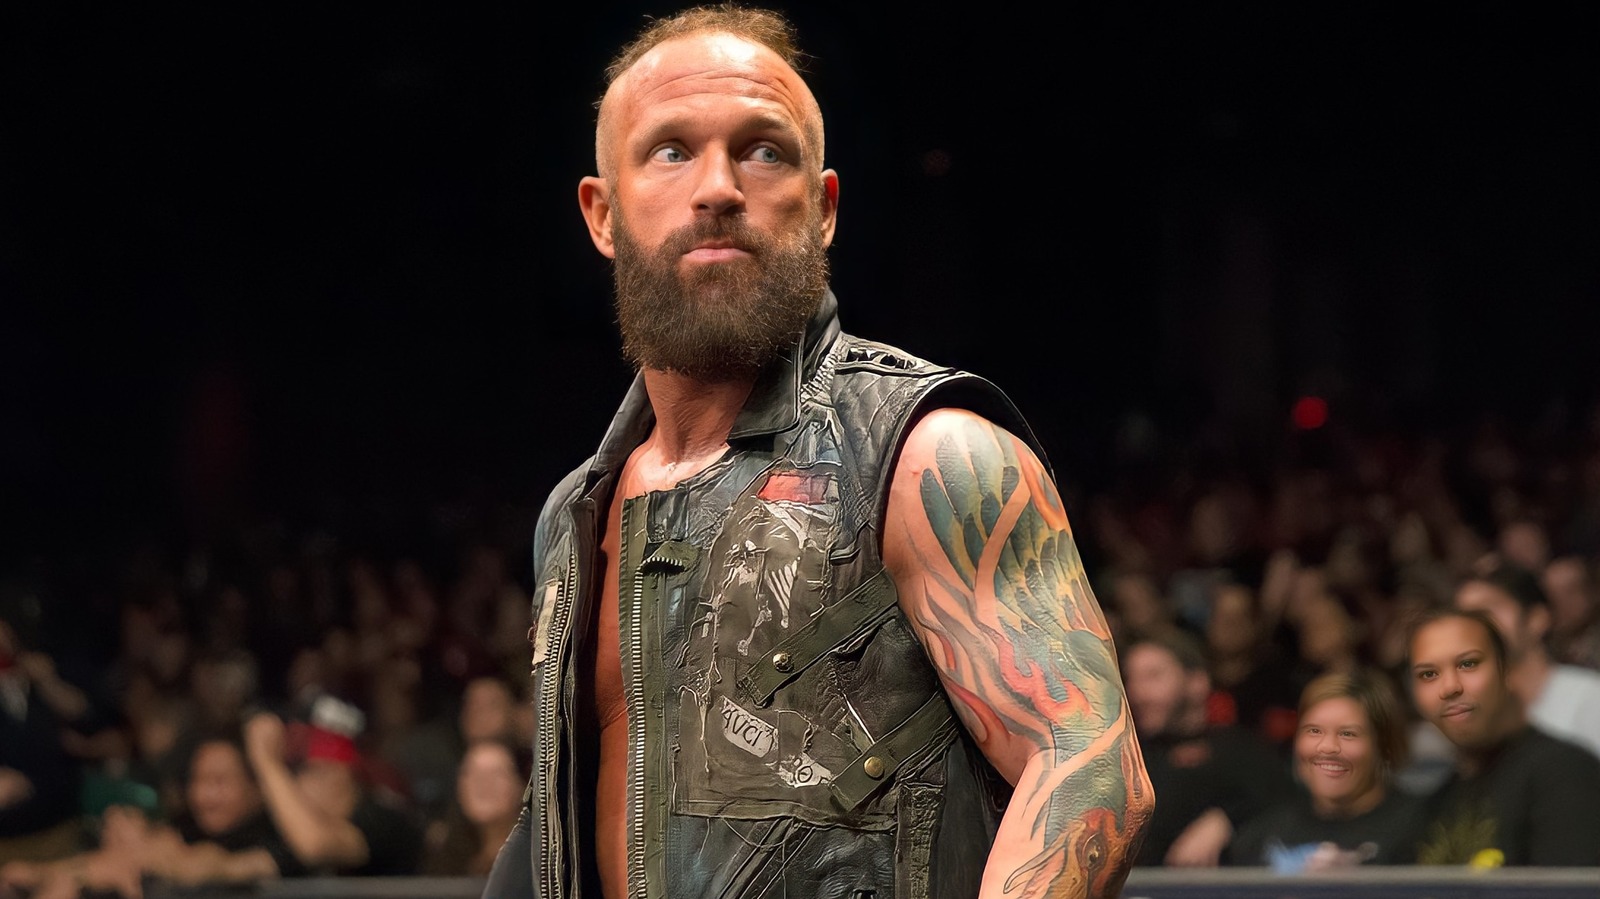 Eric Young Reportedly Left WWE In April, Didn't Want To Work With Vince McMahon